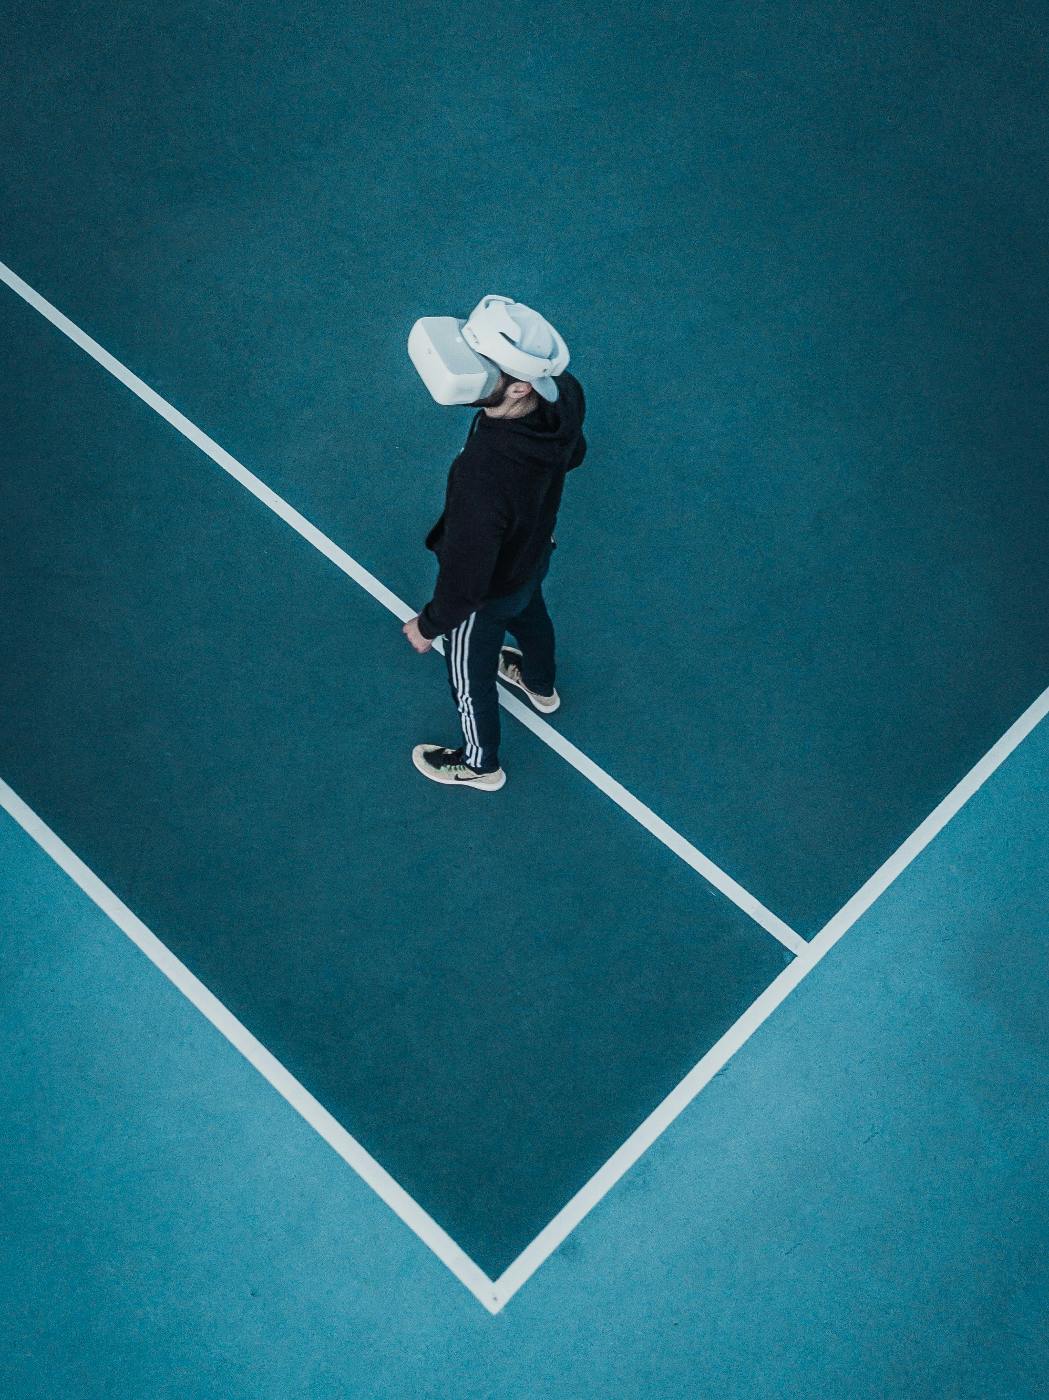 A man in a black sweat suit standing on a tennis court wearing a VR headset